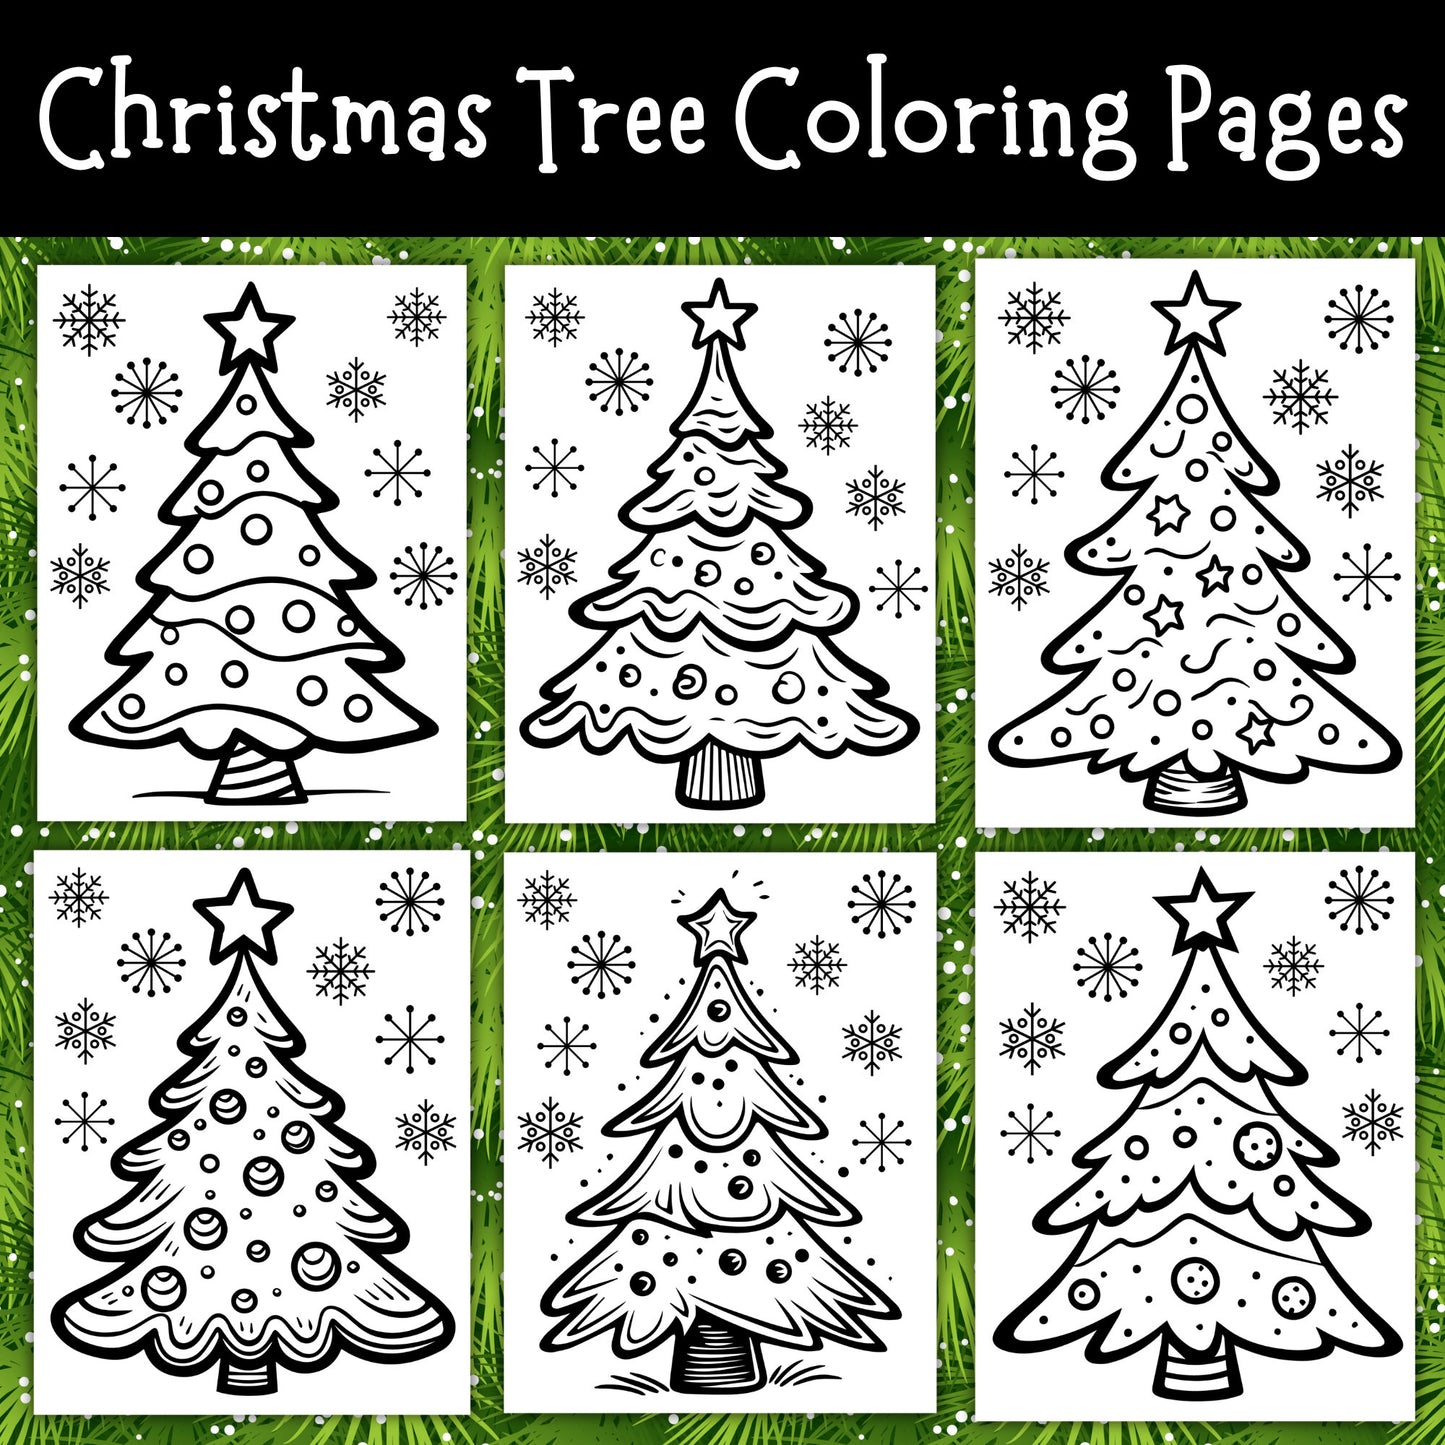 Christmas Tree Coloring Pages, Christmas Coloring Pages, Printable Christmas Activities for Kids, Christmas Tree Activities and Worksheets